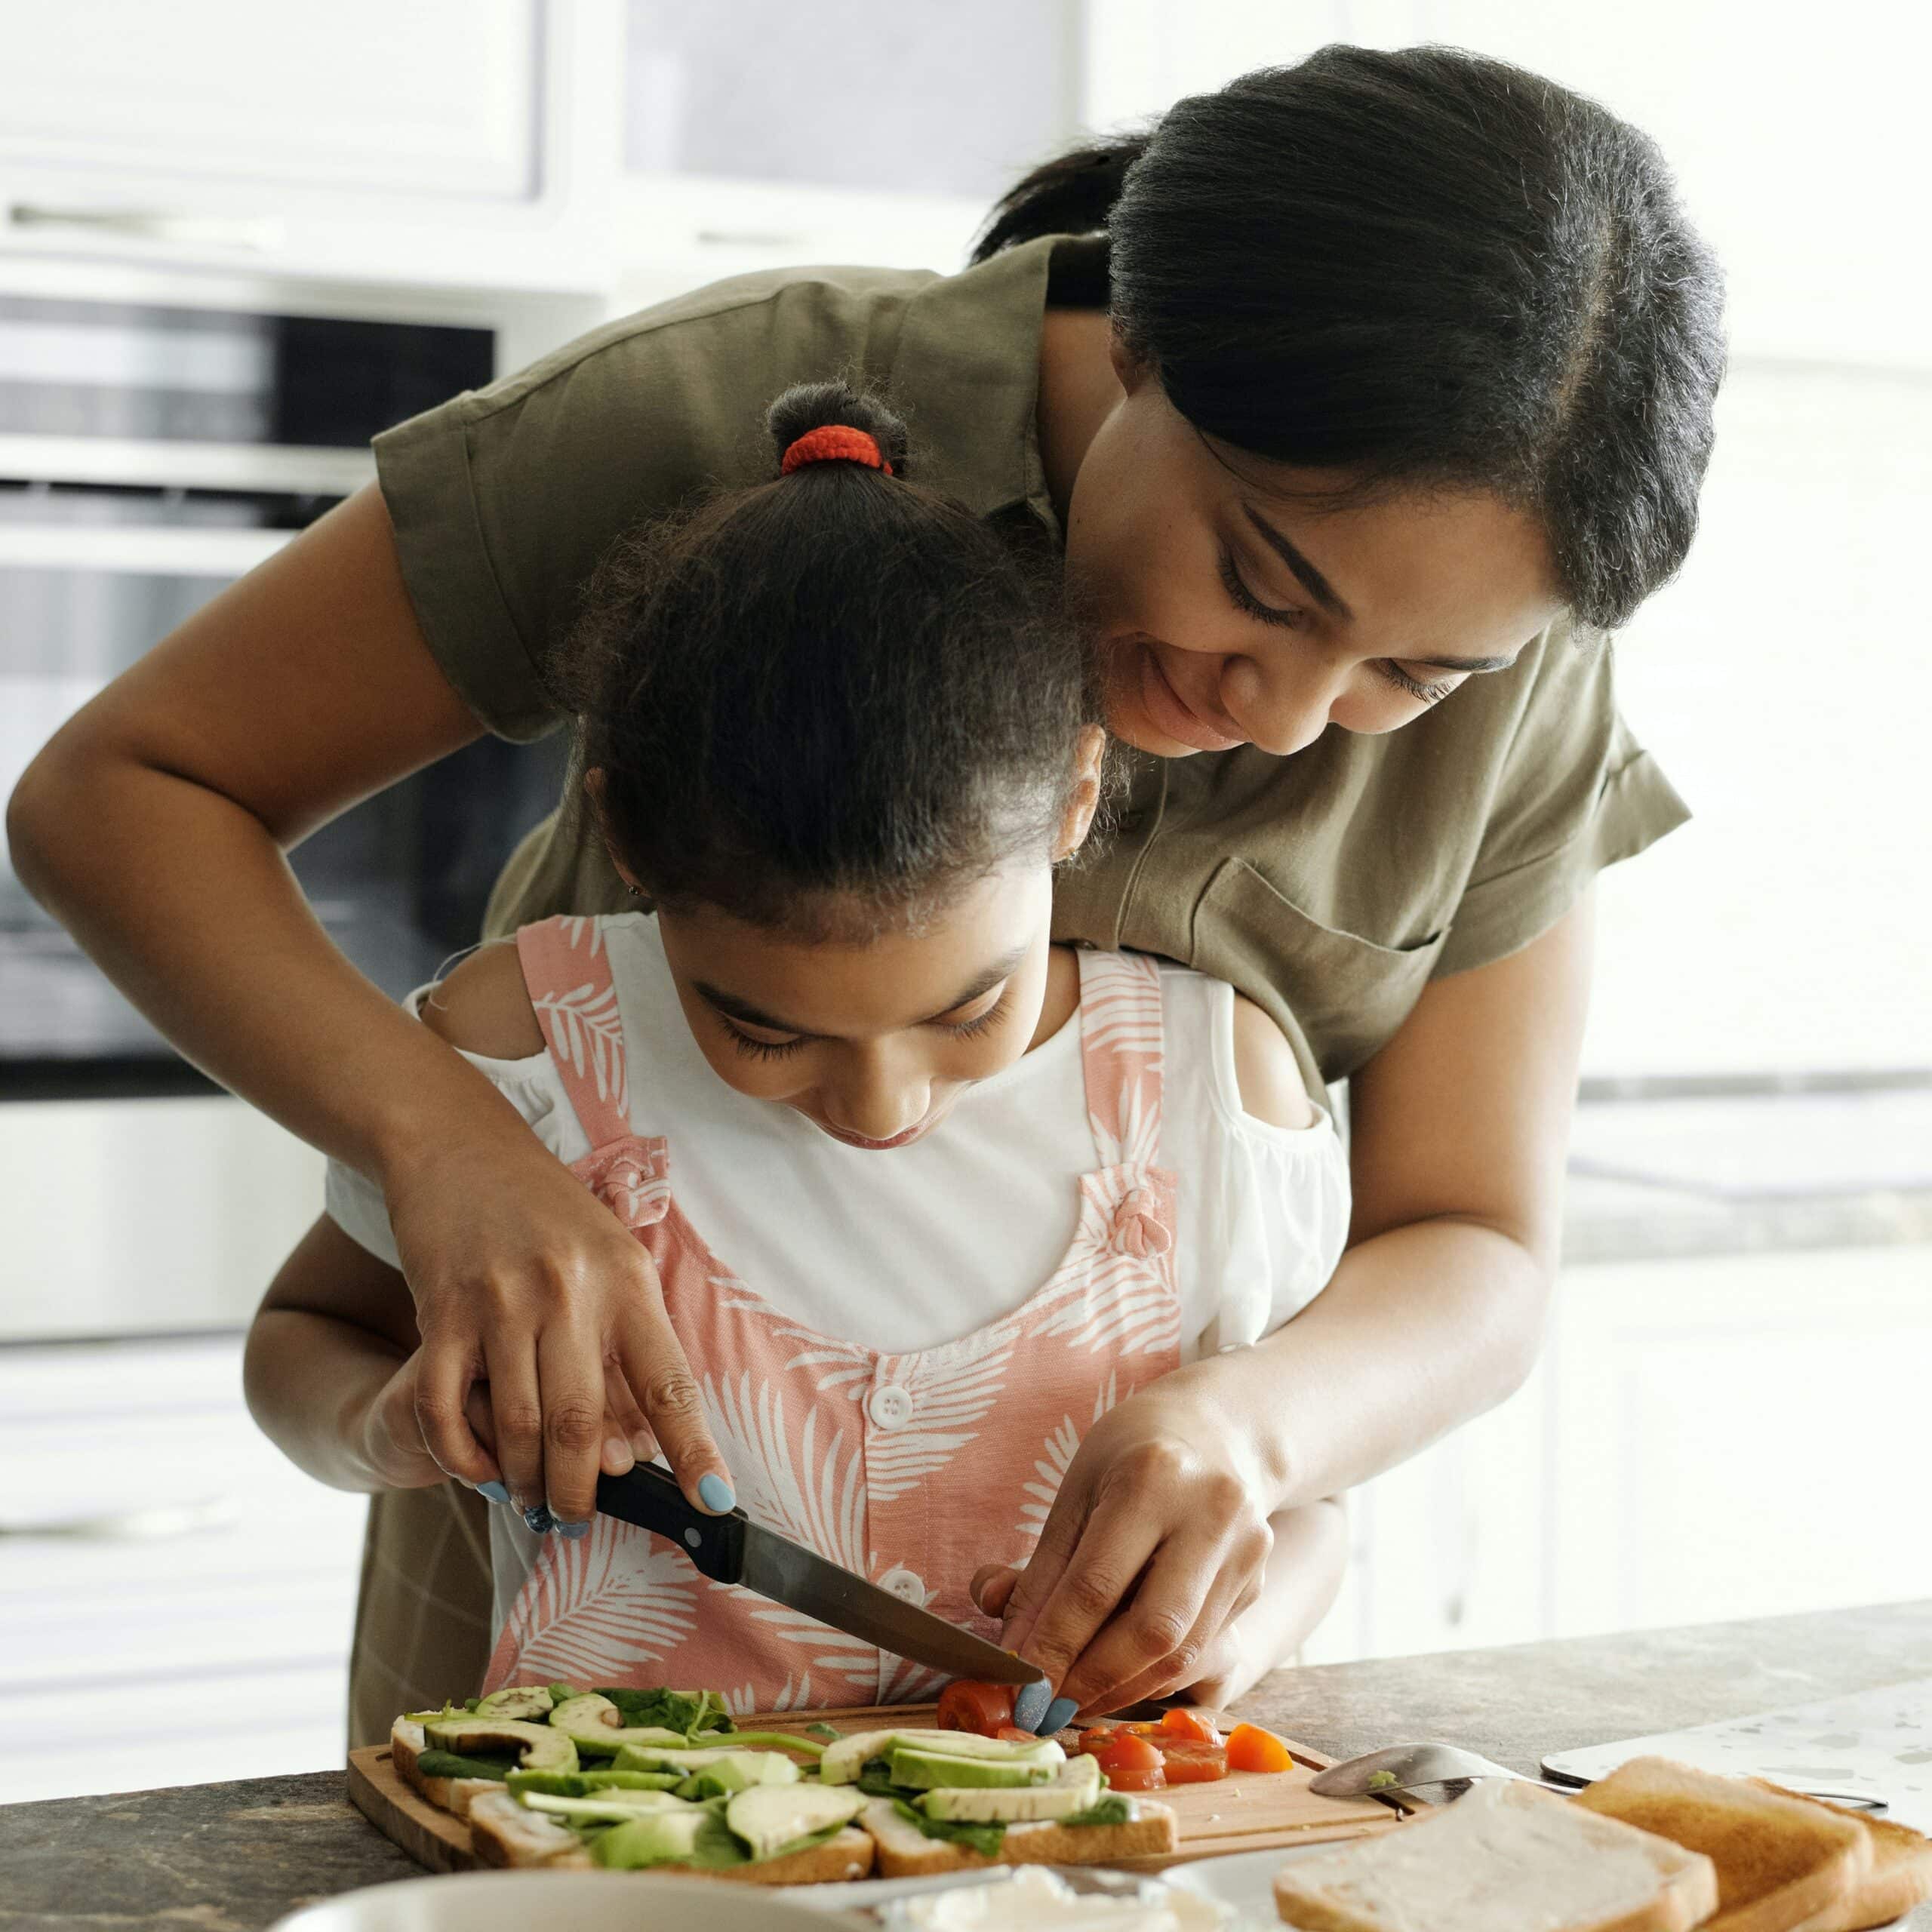 Unleash their inner chef! Bond with your little ones in the kitchen and build lifelong healthy eating habits